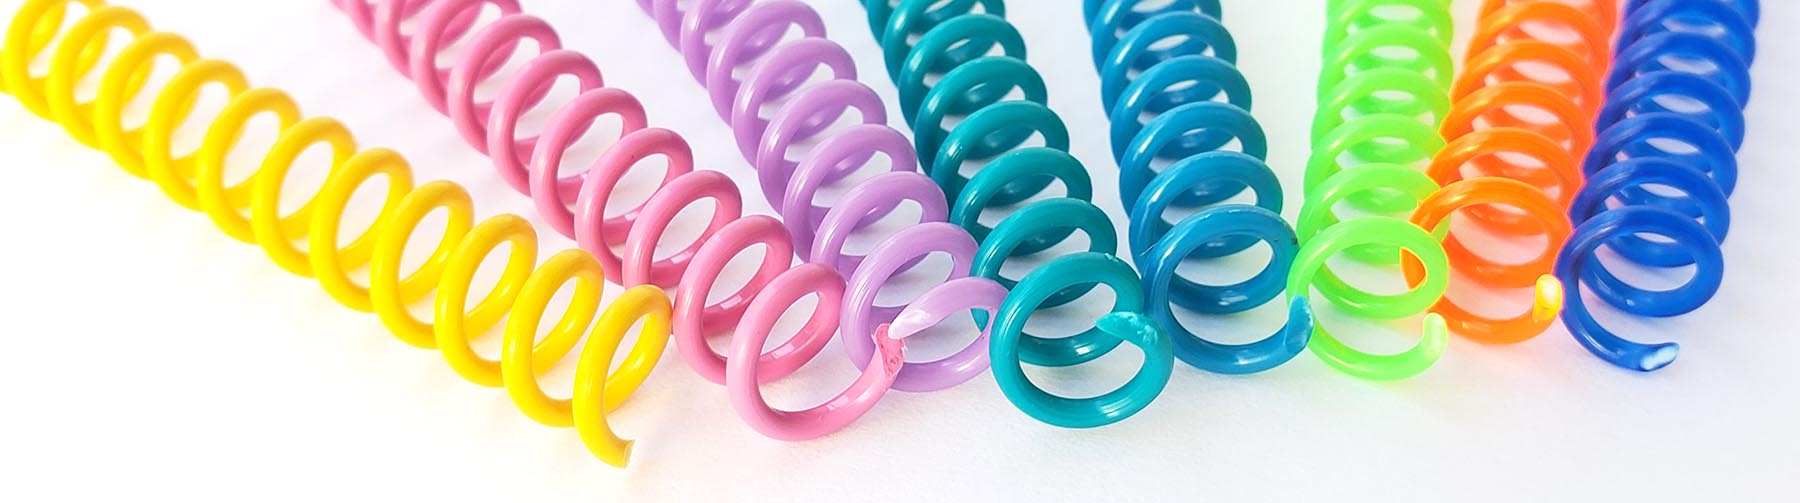 Yellow, pink, purple, teal, sky blue, neon green, orange, and blue spiral coils. 